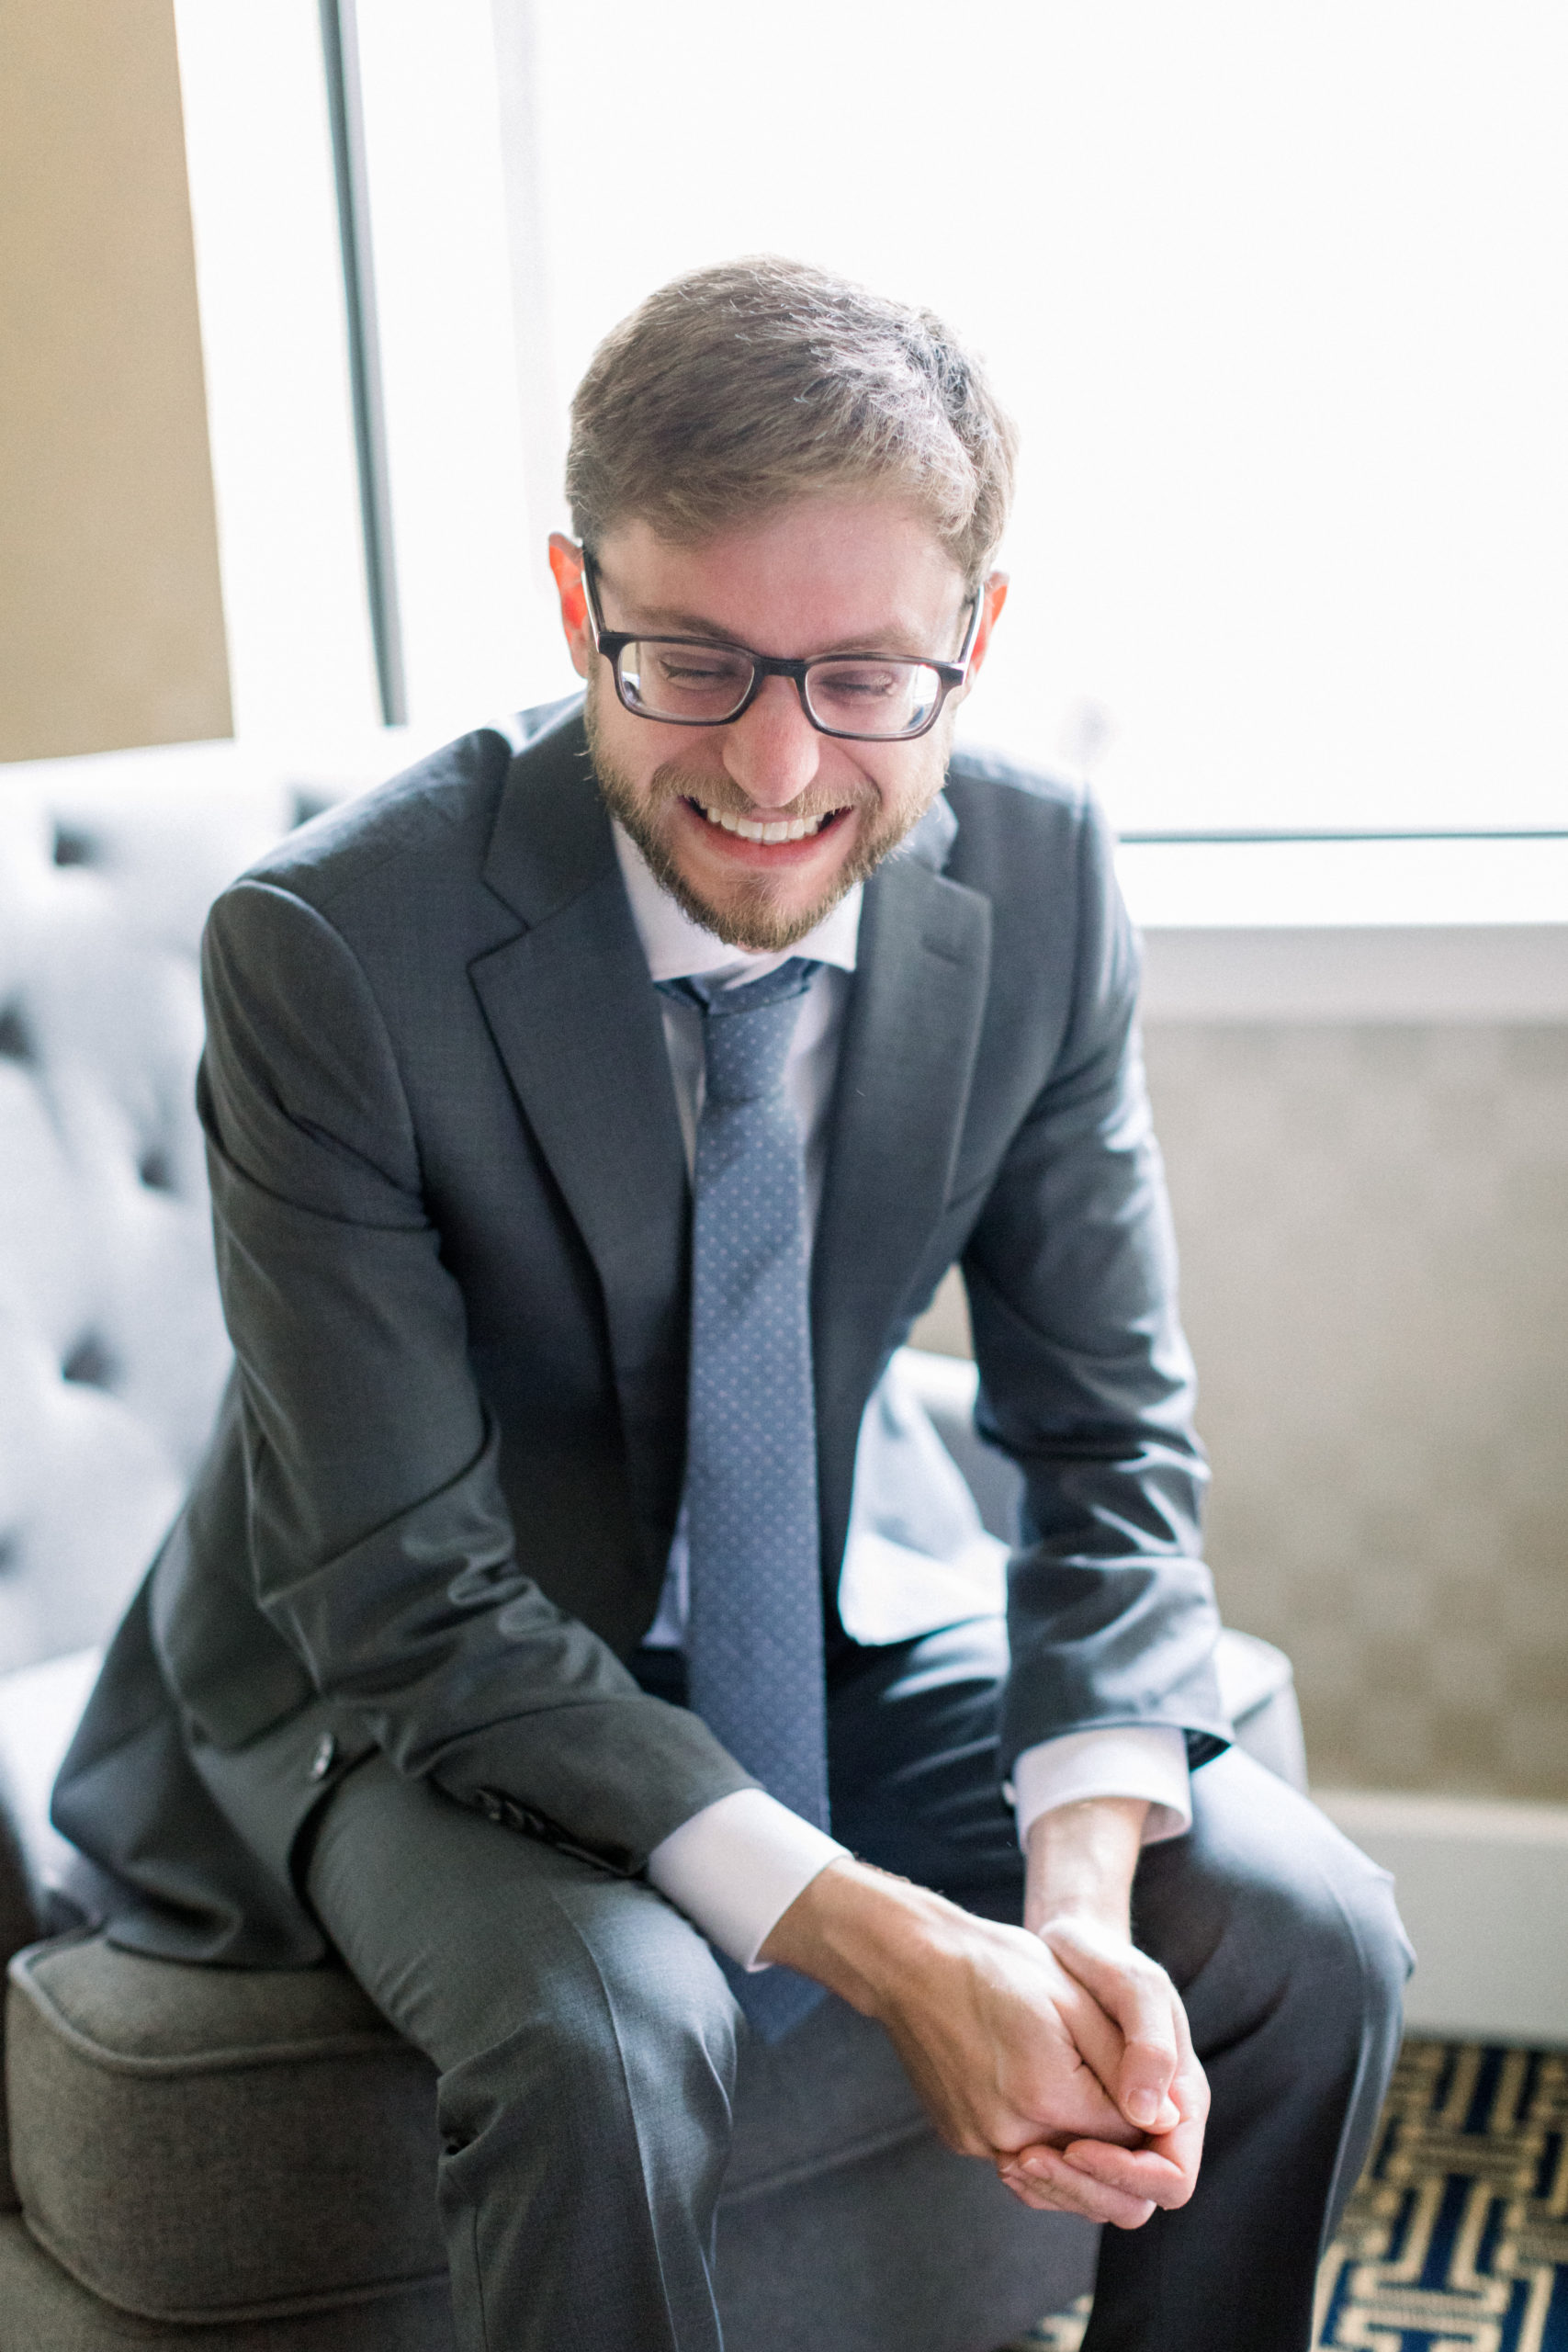 groom smiling wearing gray suit and glasses